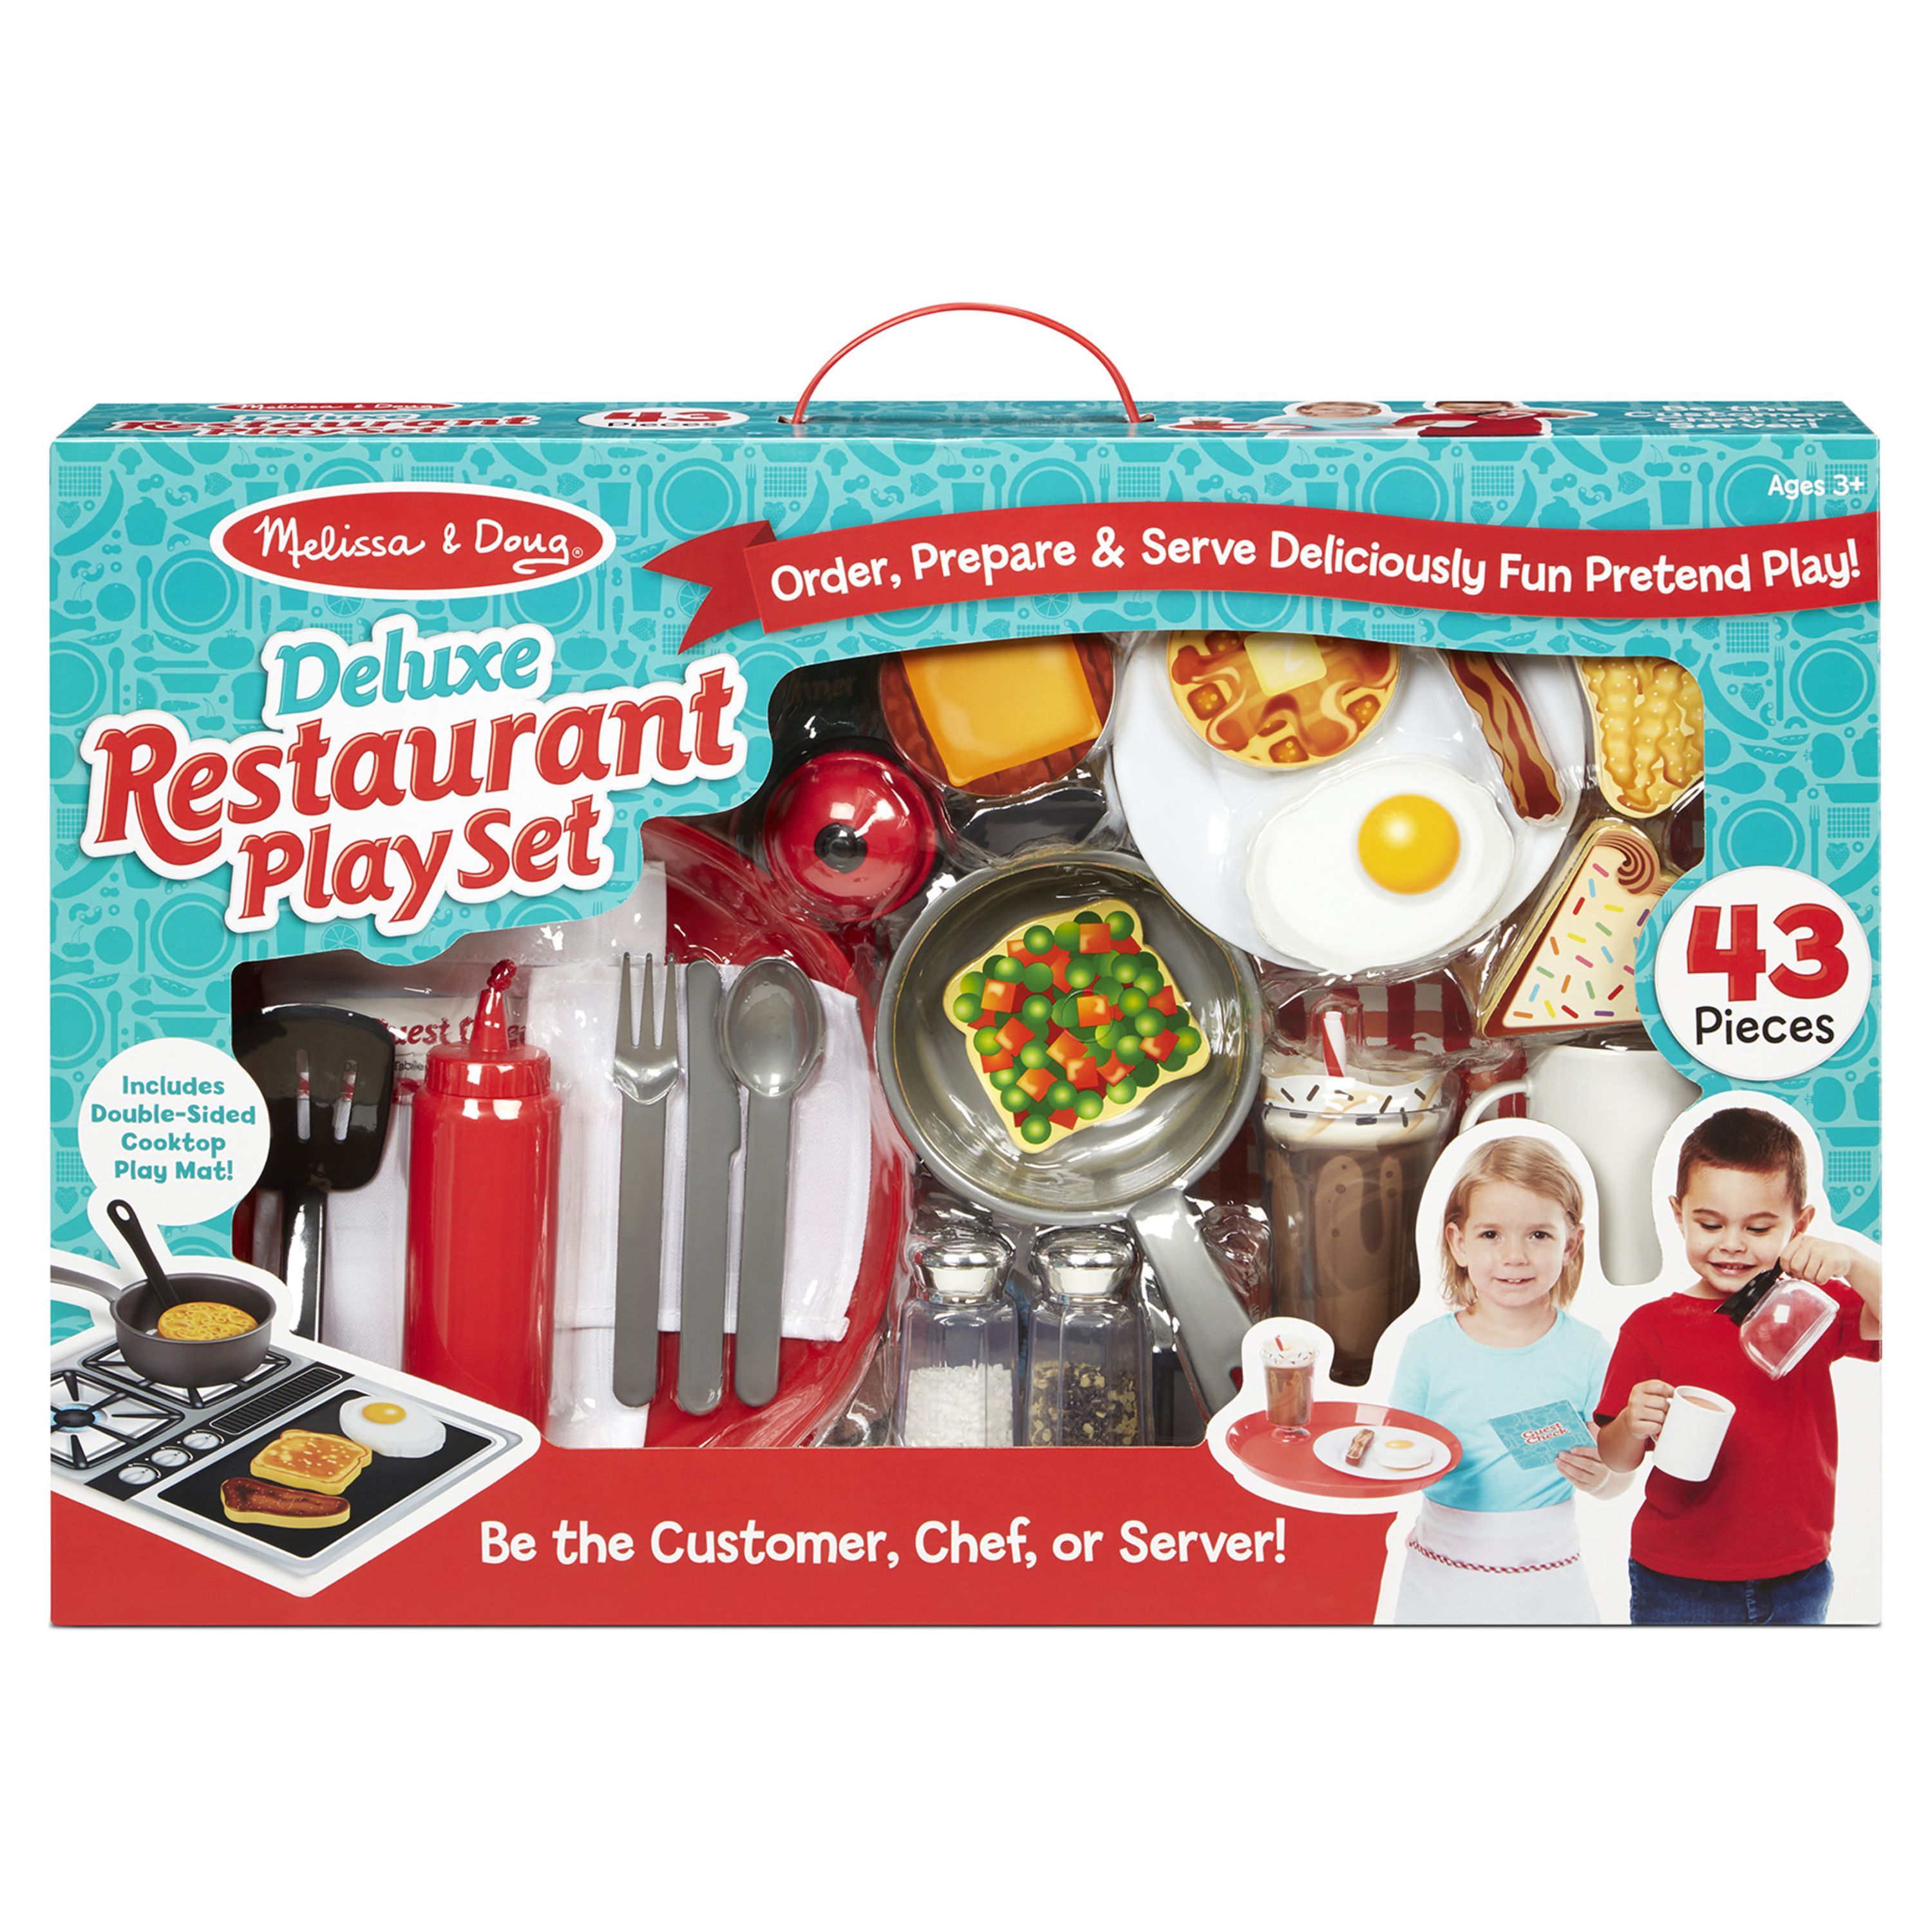 Melissa & Doug Deluxe Restaurant Cooking and Play Food Set – 43 Pieces - image 3 of 9